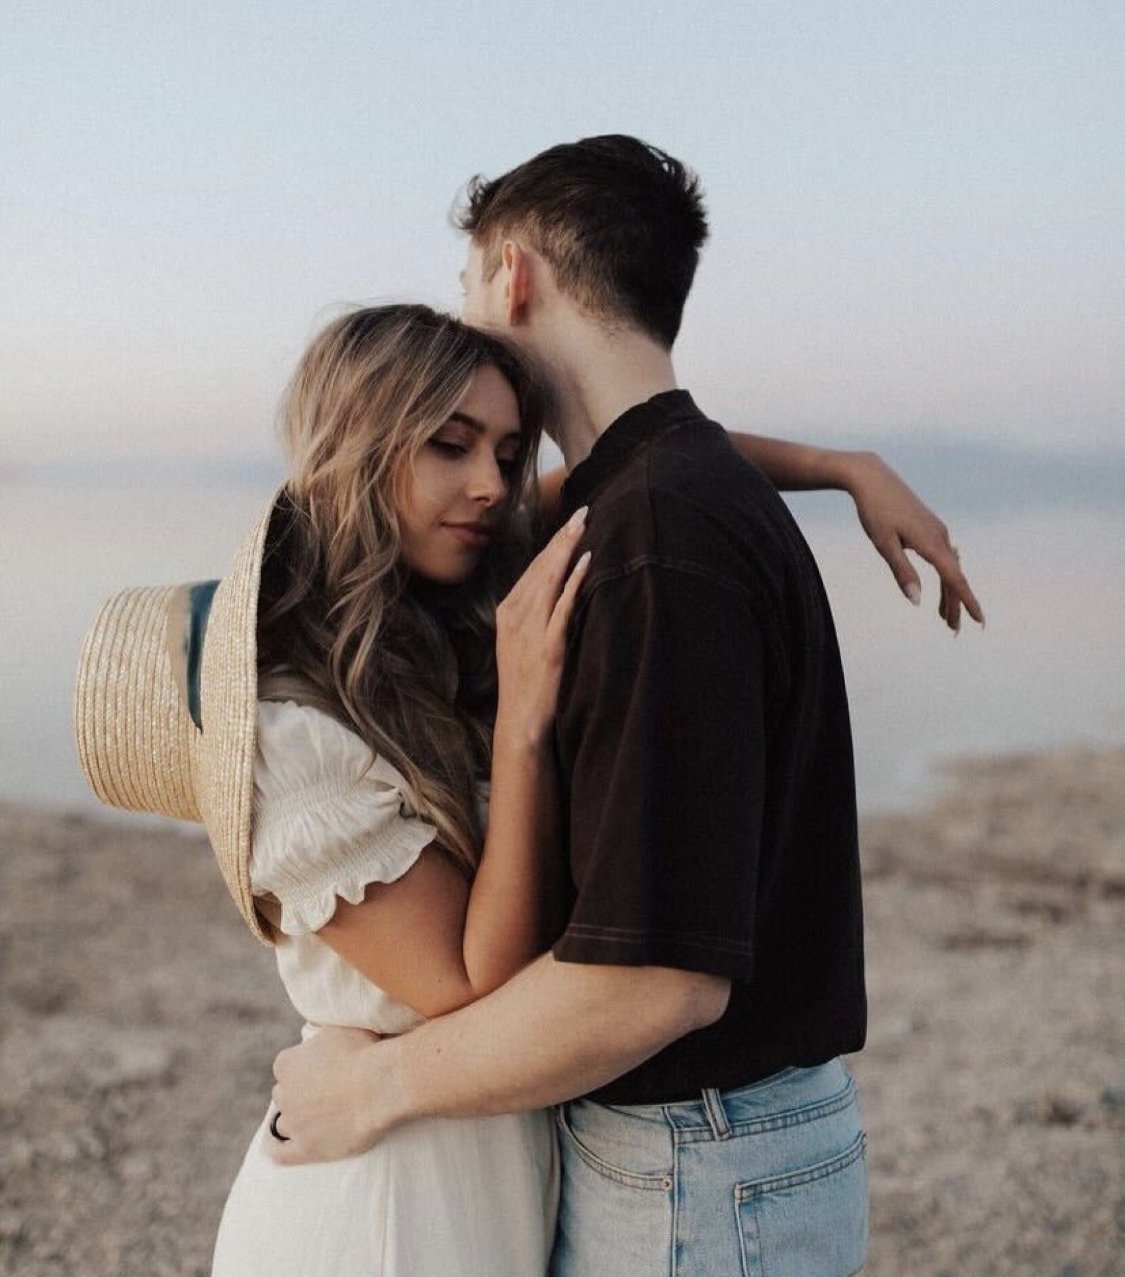 Must-Have Cute Couple Poses To Include In Your Shot List – ShootDotEdit